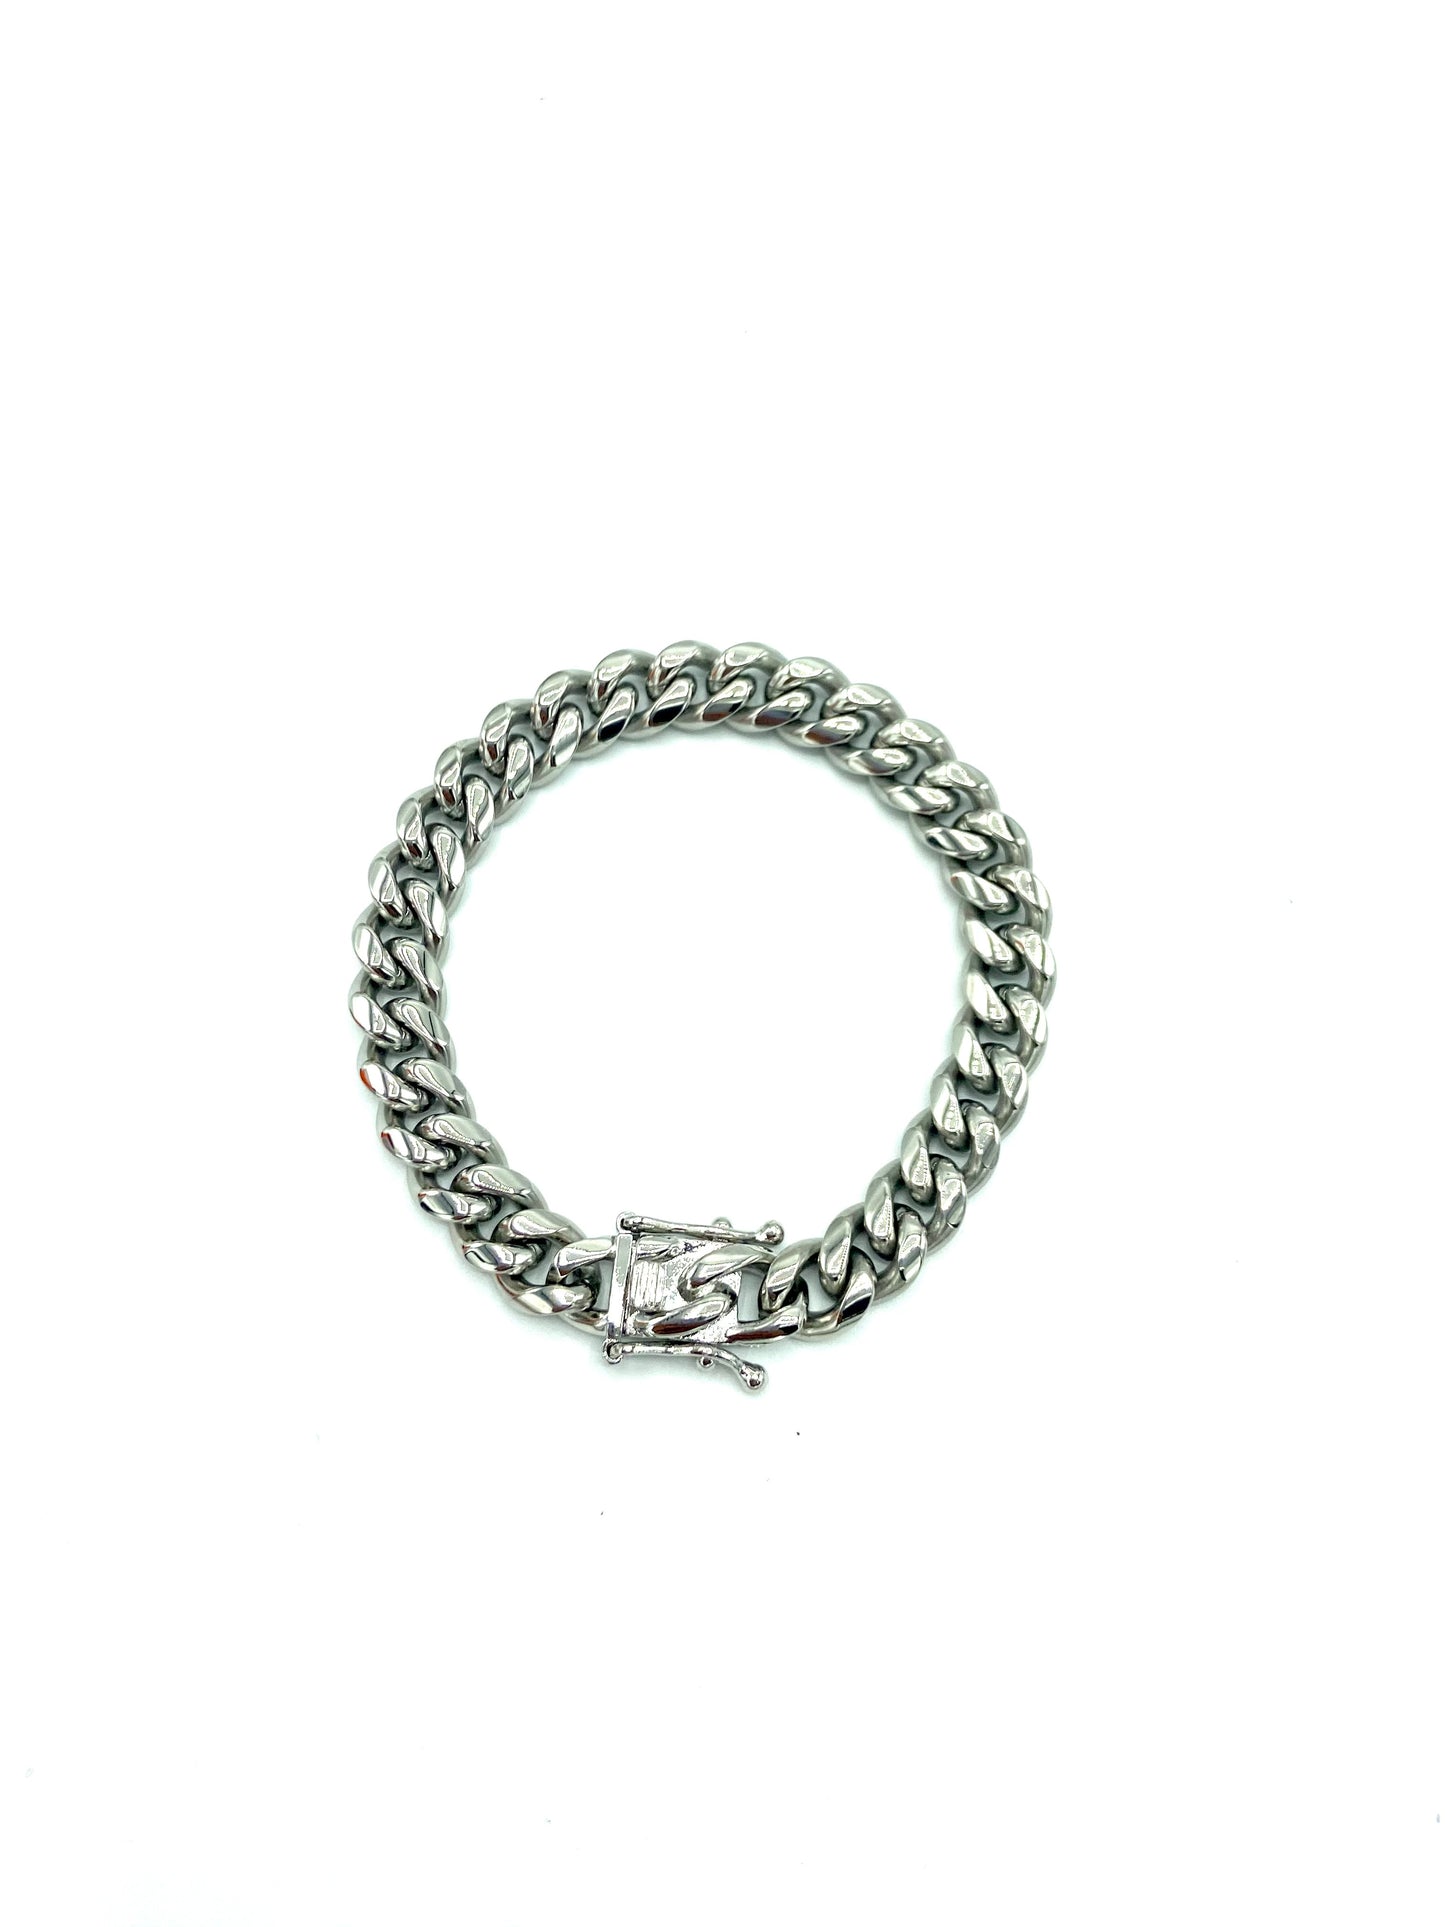 CURB BRACELET WITH LARGE CLASP